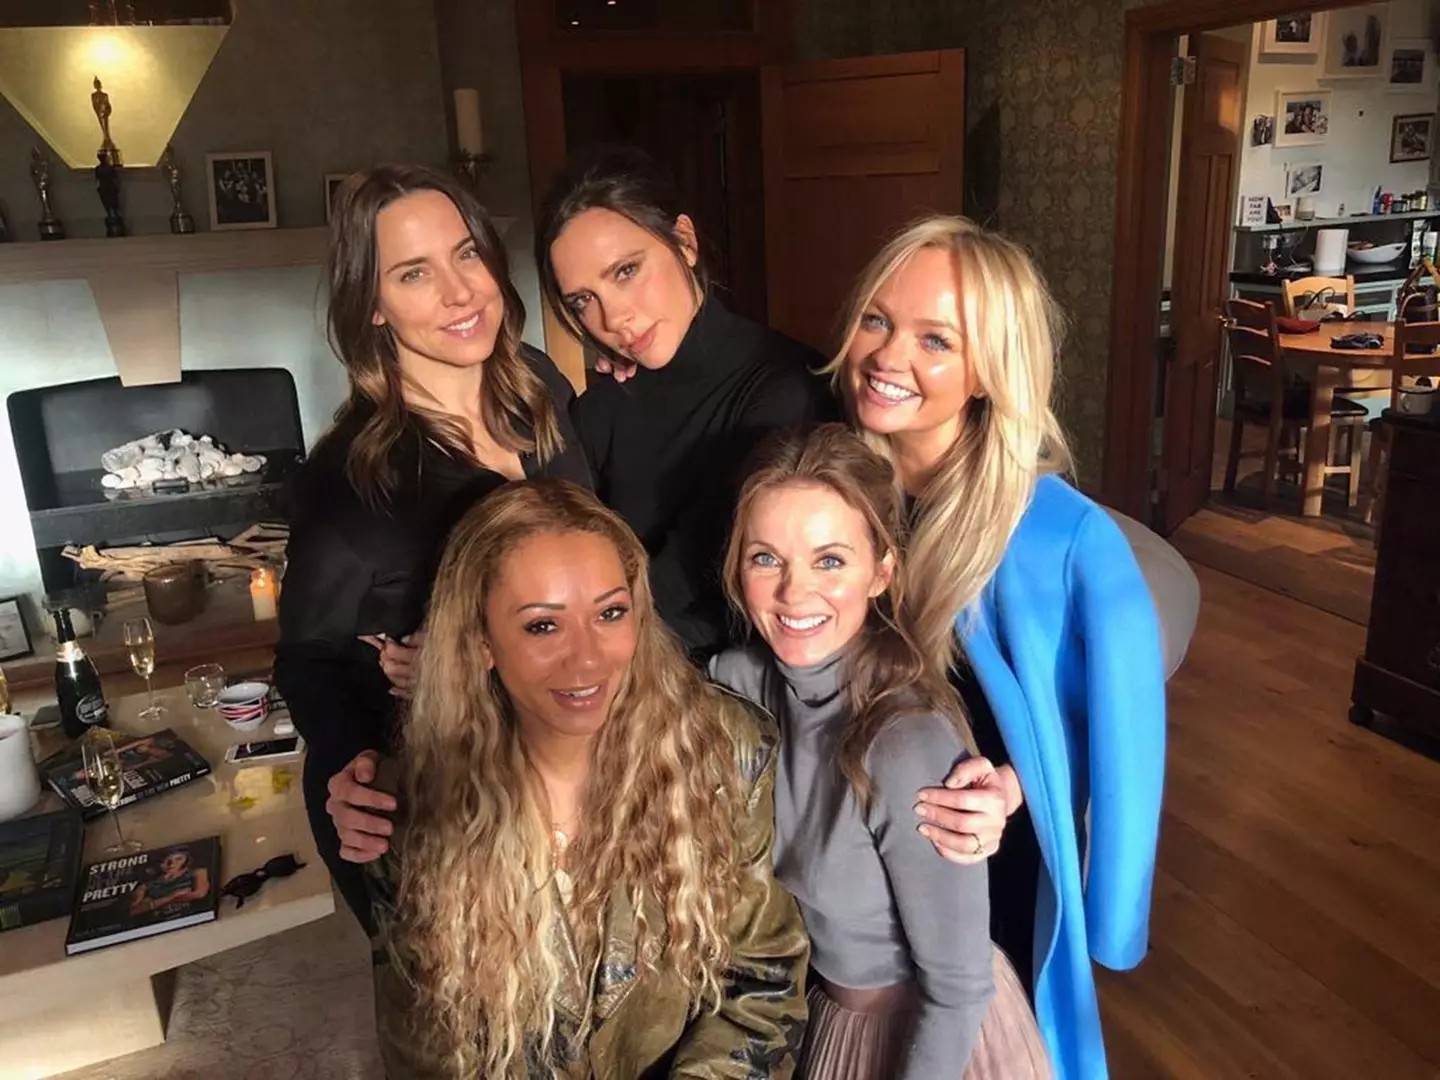 Spice Girls will reunite with all five members according to Mel B.